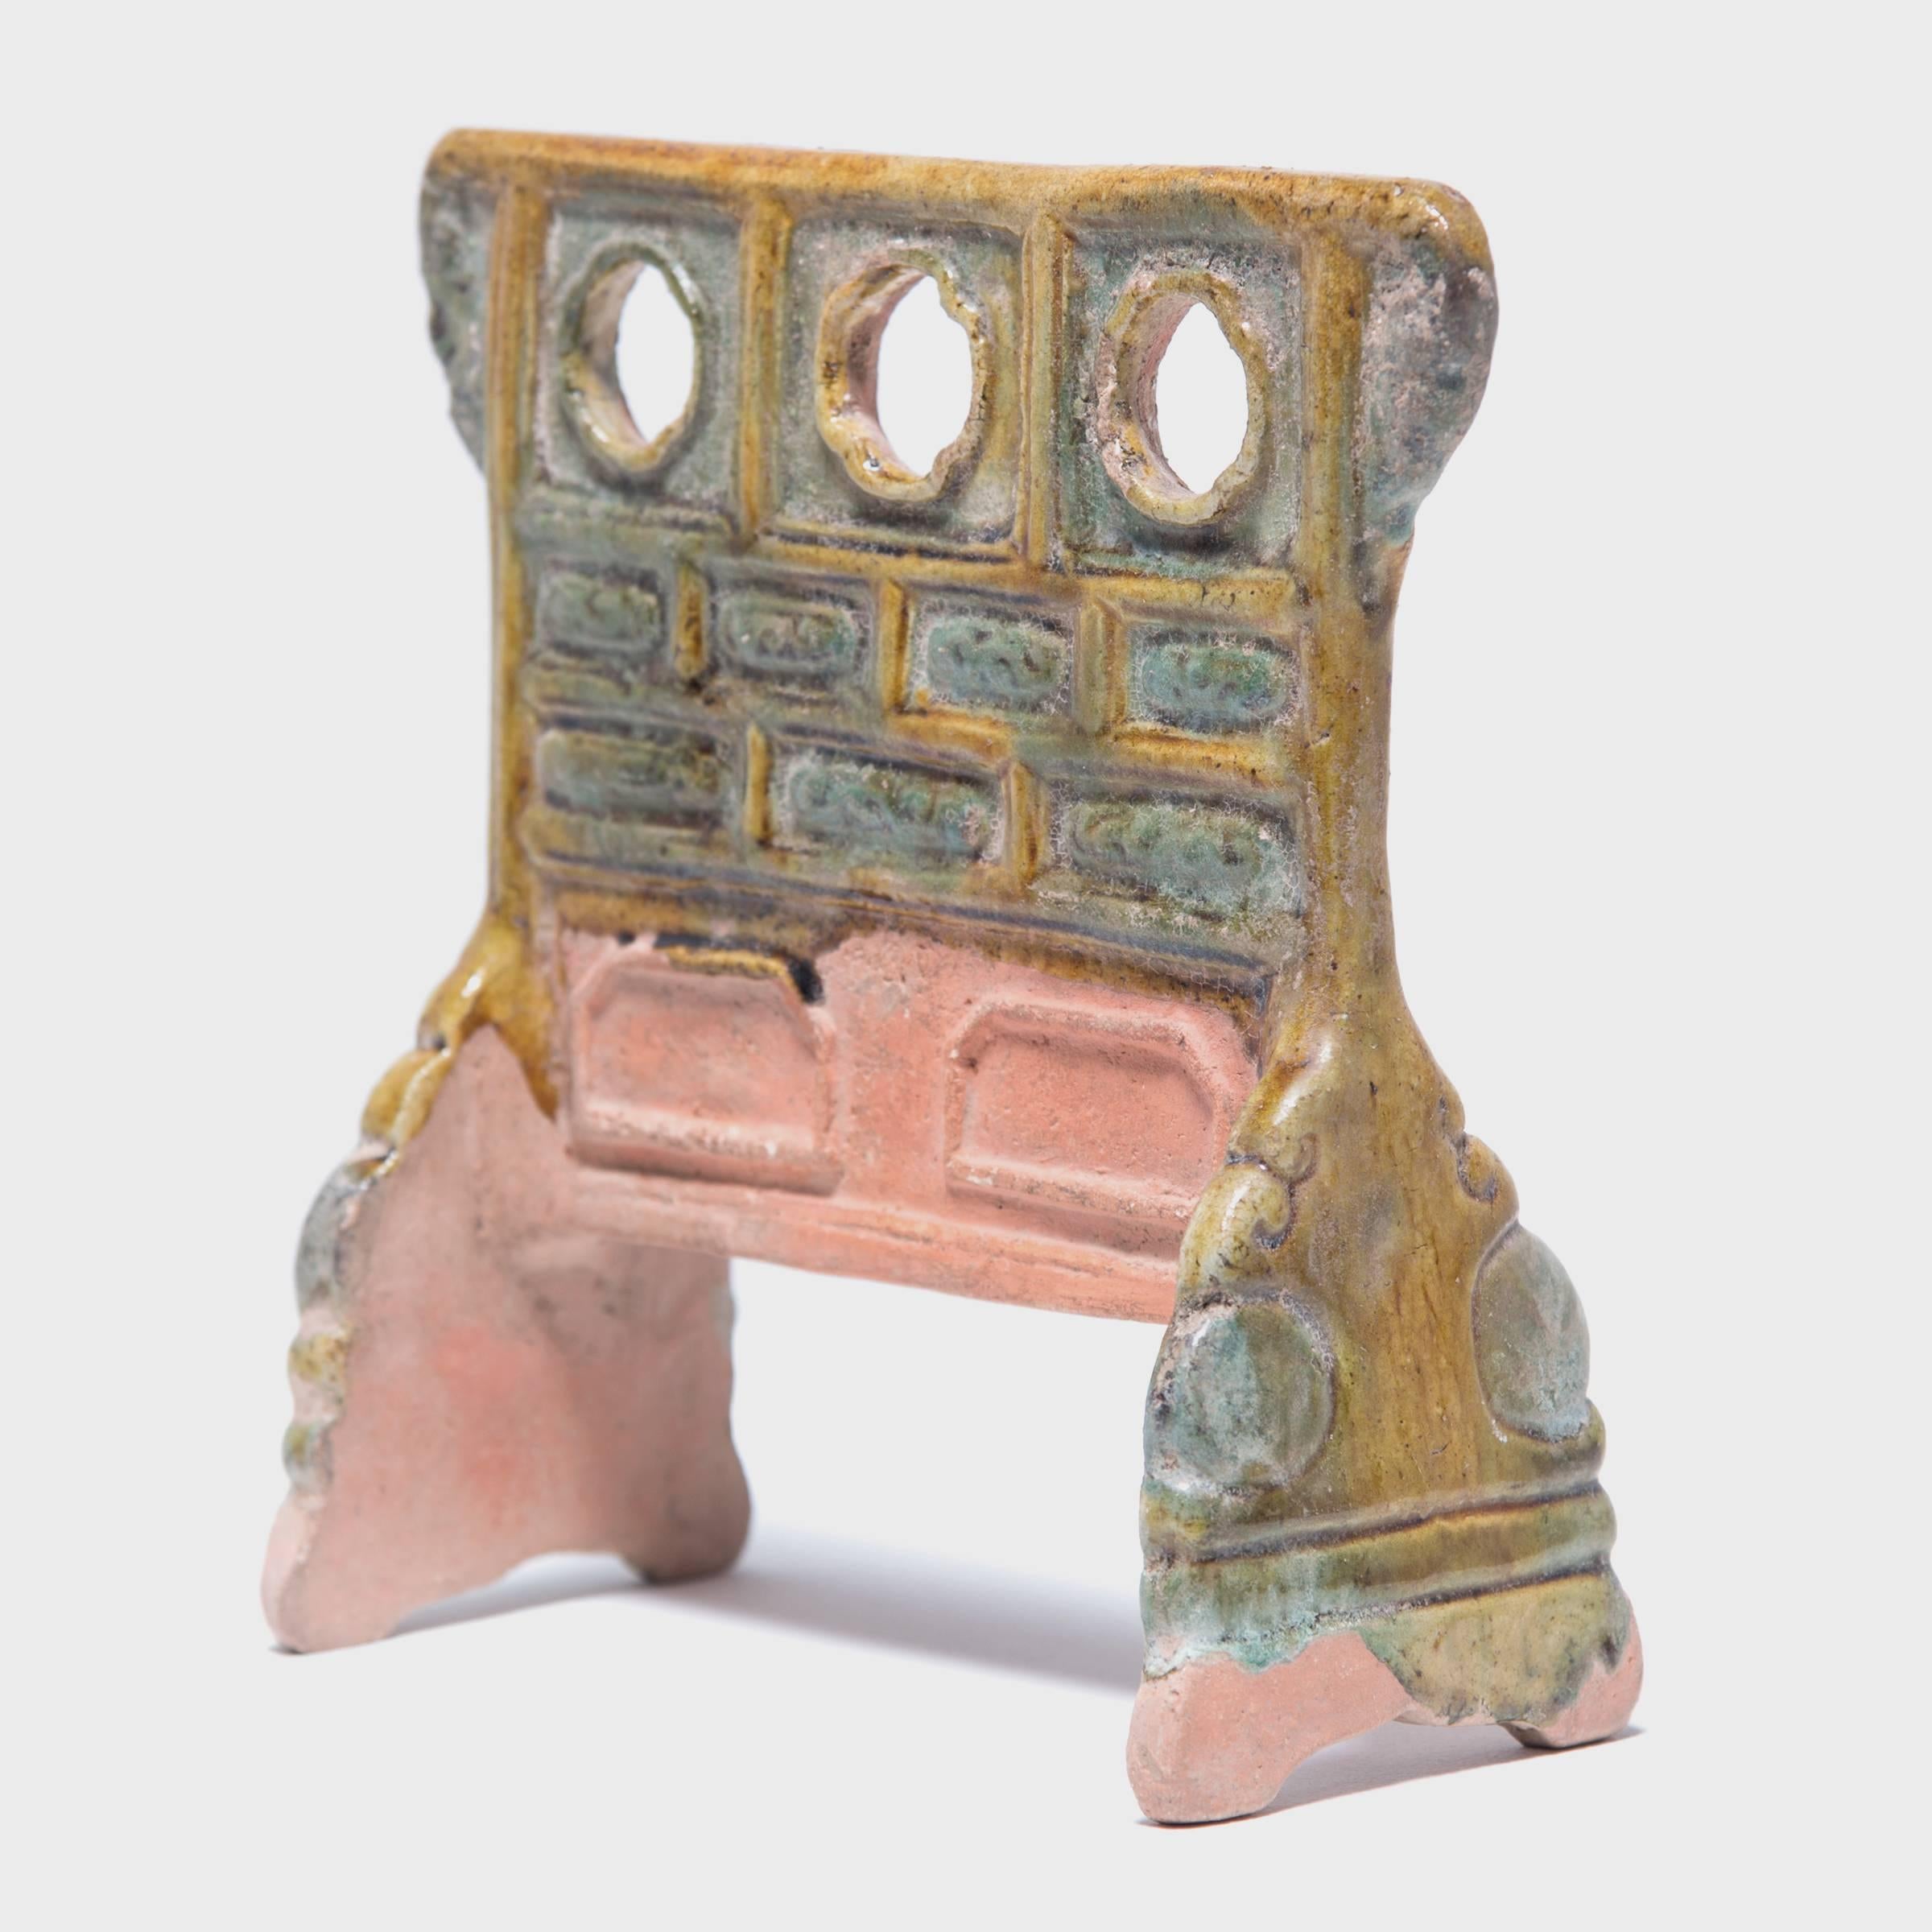 This miniature robe rack made out of glazed ceramic is called a mingqi or “spirit object.” Mingqi were buried in tombs and represented all of the things the deceased might need in their next life or in the transition to getting there: weapons,